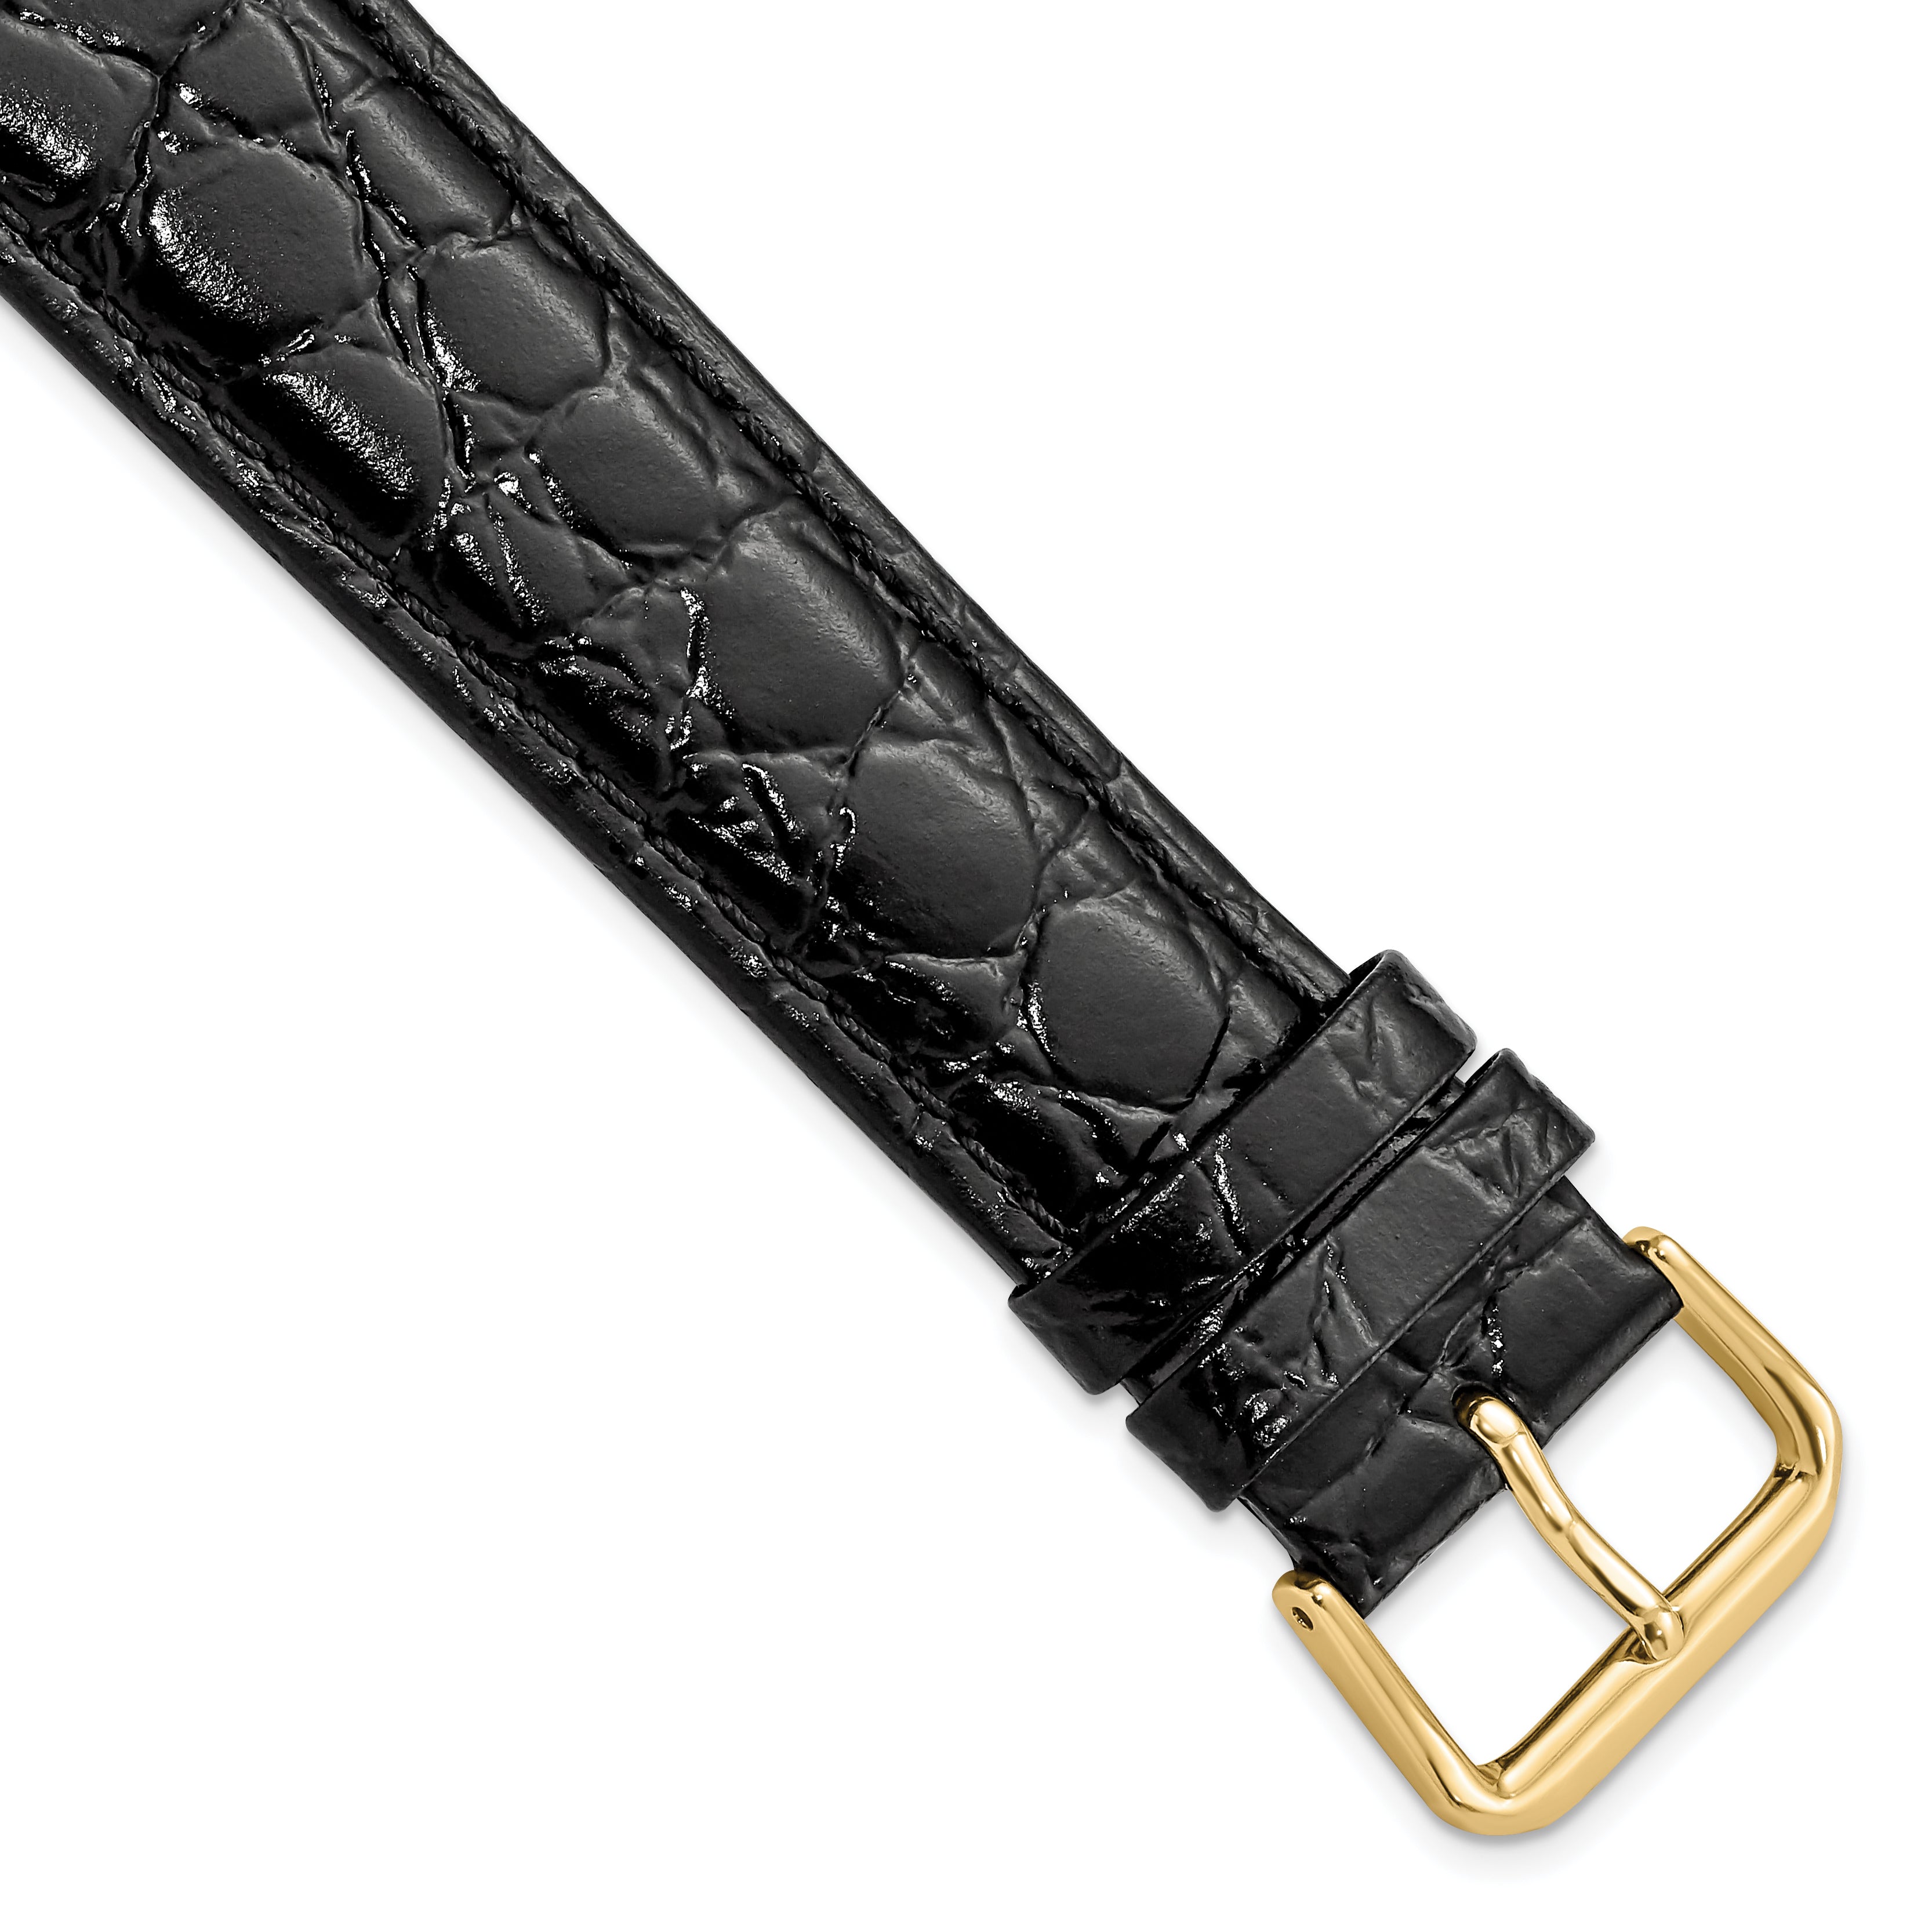 DeBeer 20mm Long Black Alligator Grain Leather with Gold-tone Buckle 8.5 inch Watch Band